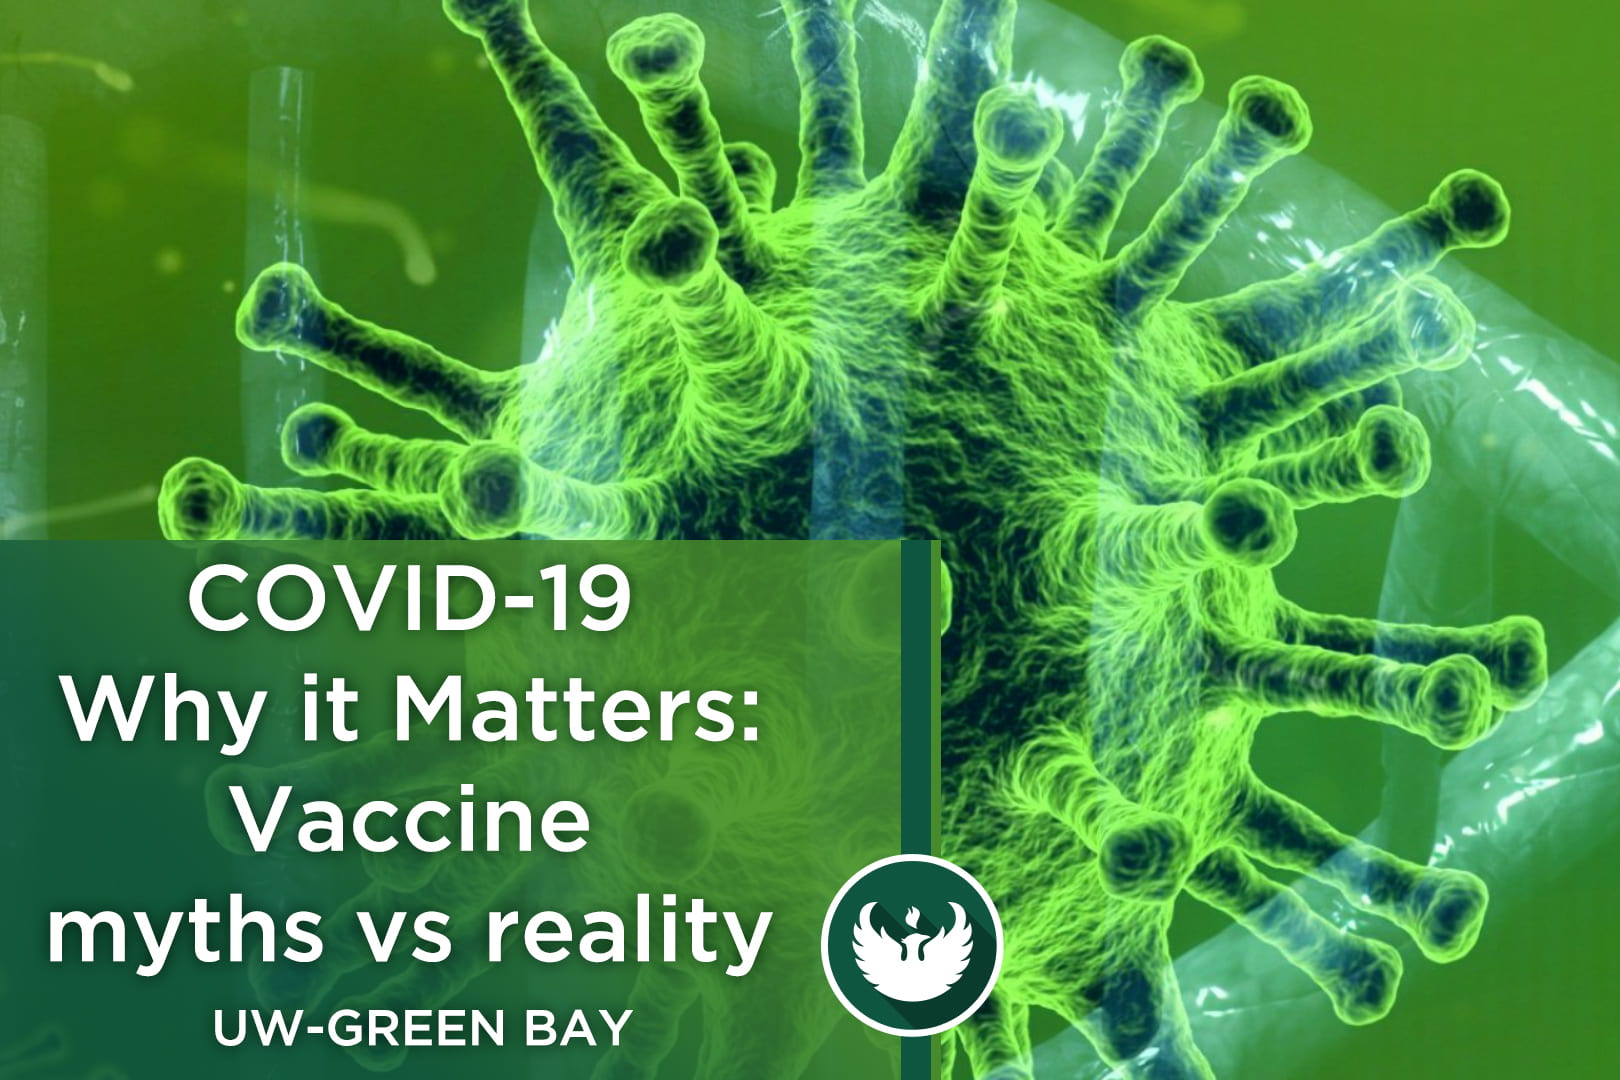 Photo of the covid-19 virus enlarged under a microscope with the text, "COVID-19 Why it Matters: Vaccine myths vs reality."